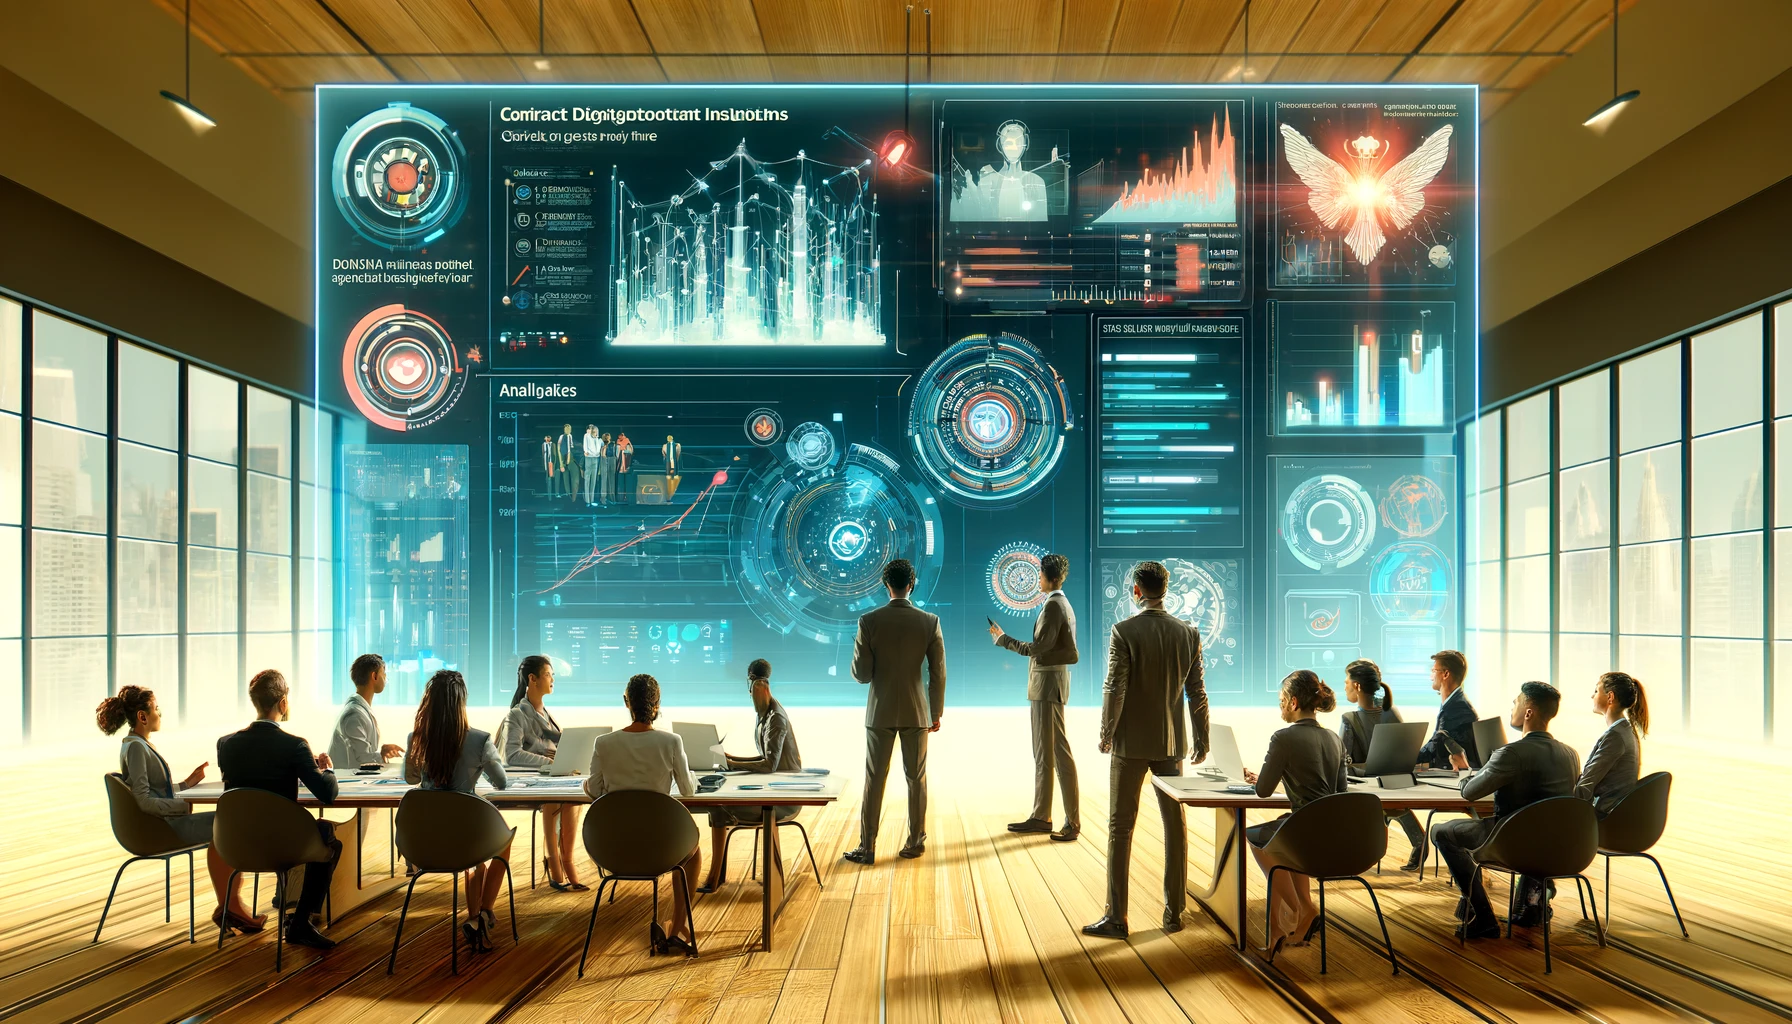 Here's the illustration for the article about Unilever's use of DocuSign Insights to enhance its due diligence process during an M&A transaction. The scene captures a modern corporate setting where professionals are engaging with a digital display, showcasing AI-powered data analysis. The color palette is a balanced mix of warm and cool tones, with the main characters prominently featured.